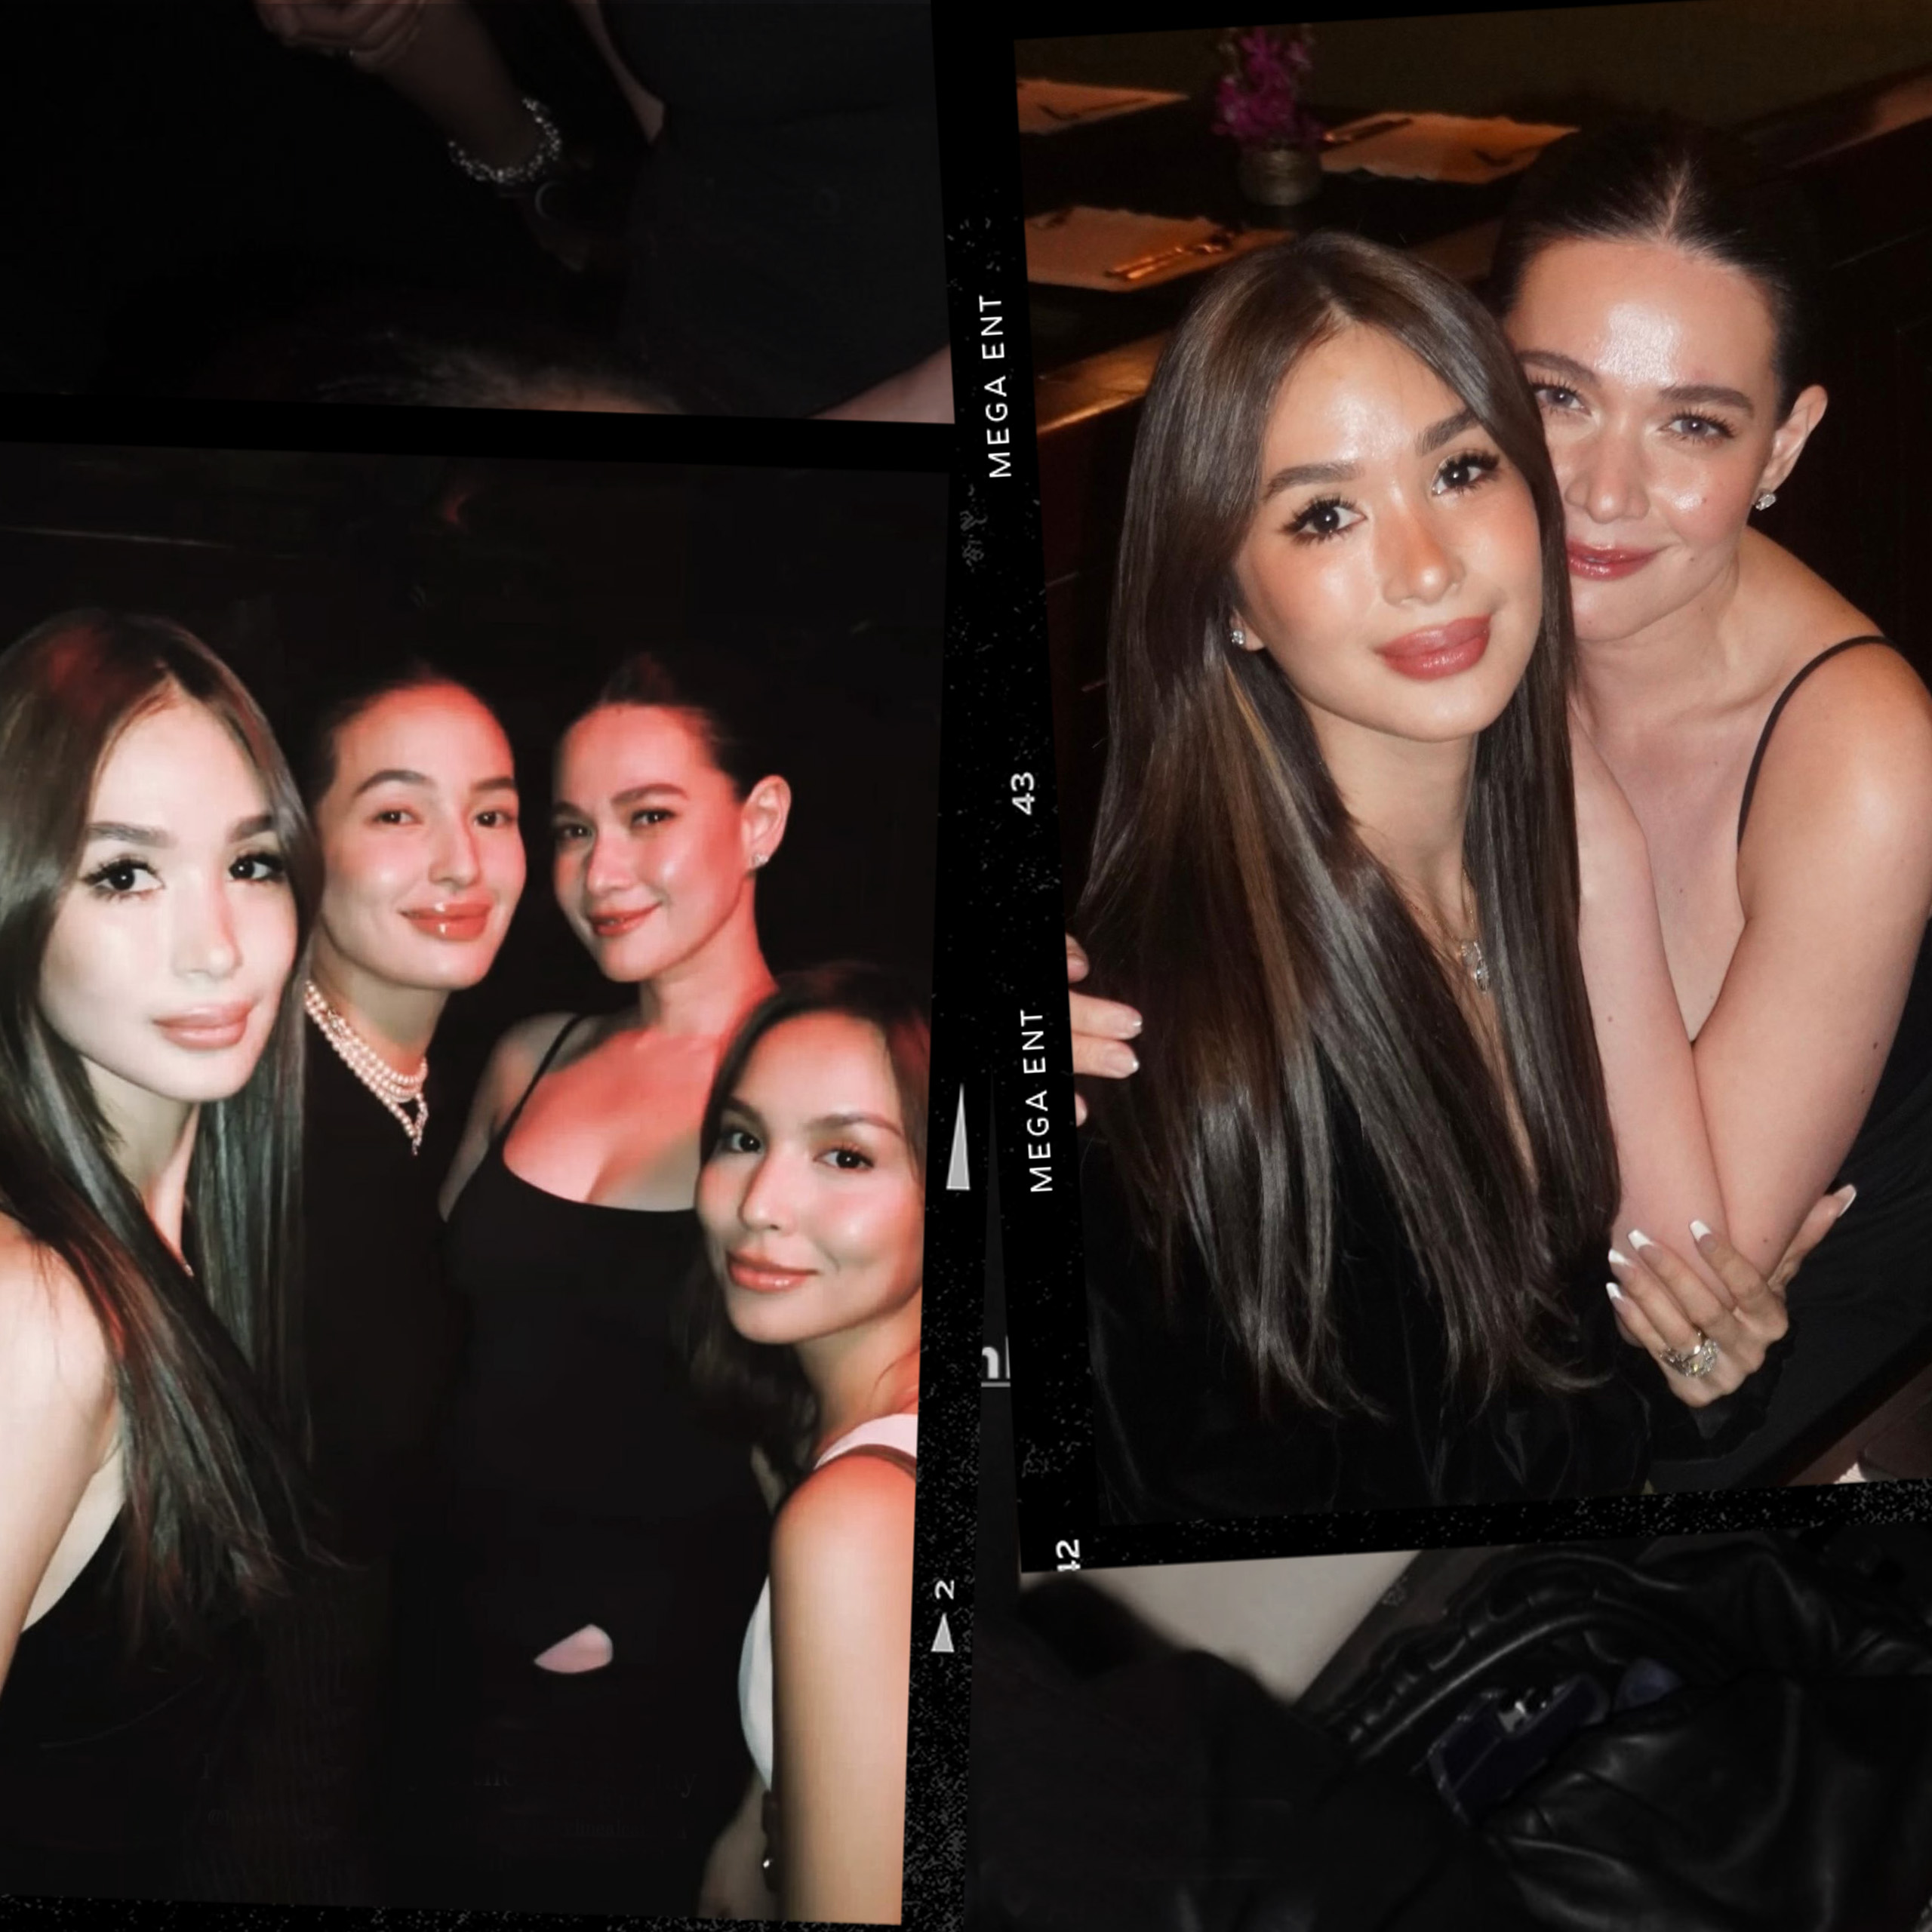 Heart Evangelista, Bea Alonzo, Sarah Lahbati, and Kyline Alcantara are Dancing Queens During a Night Out